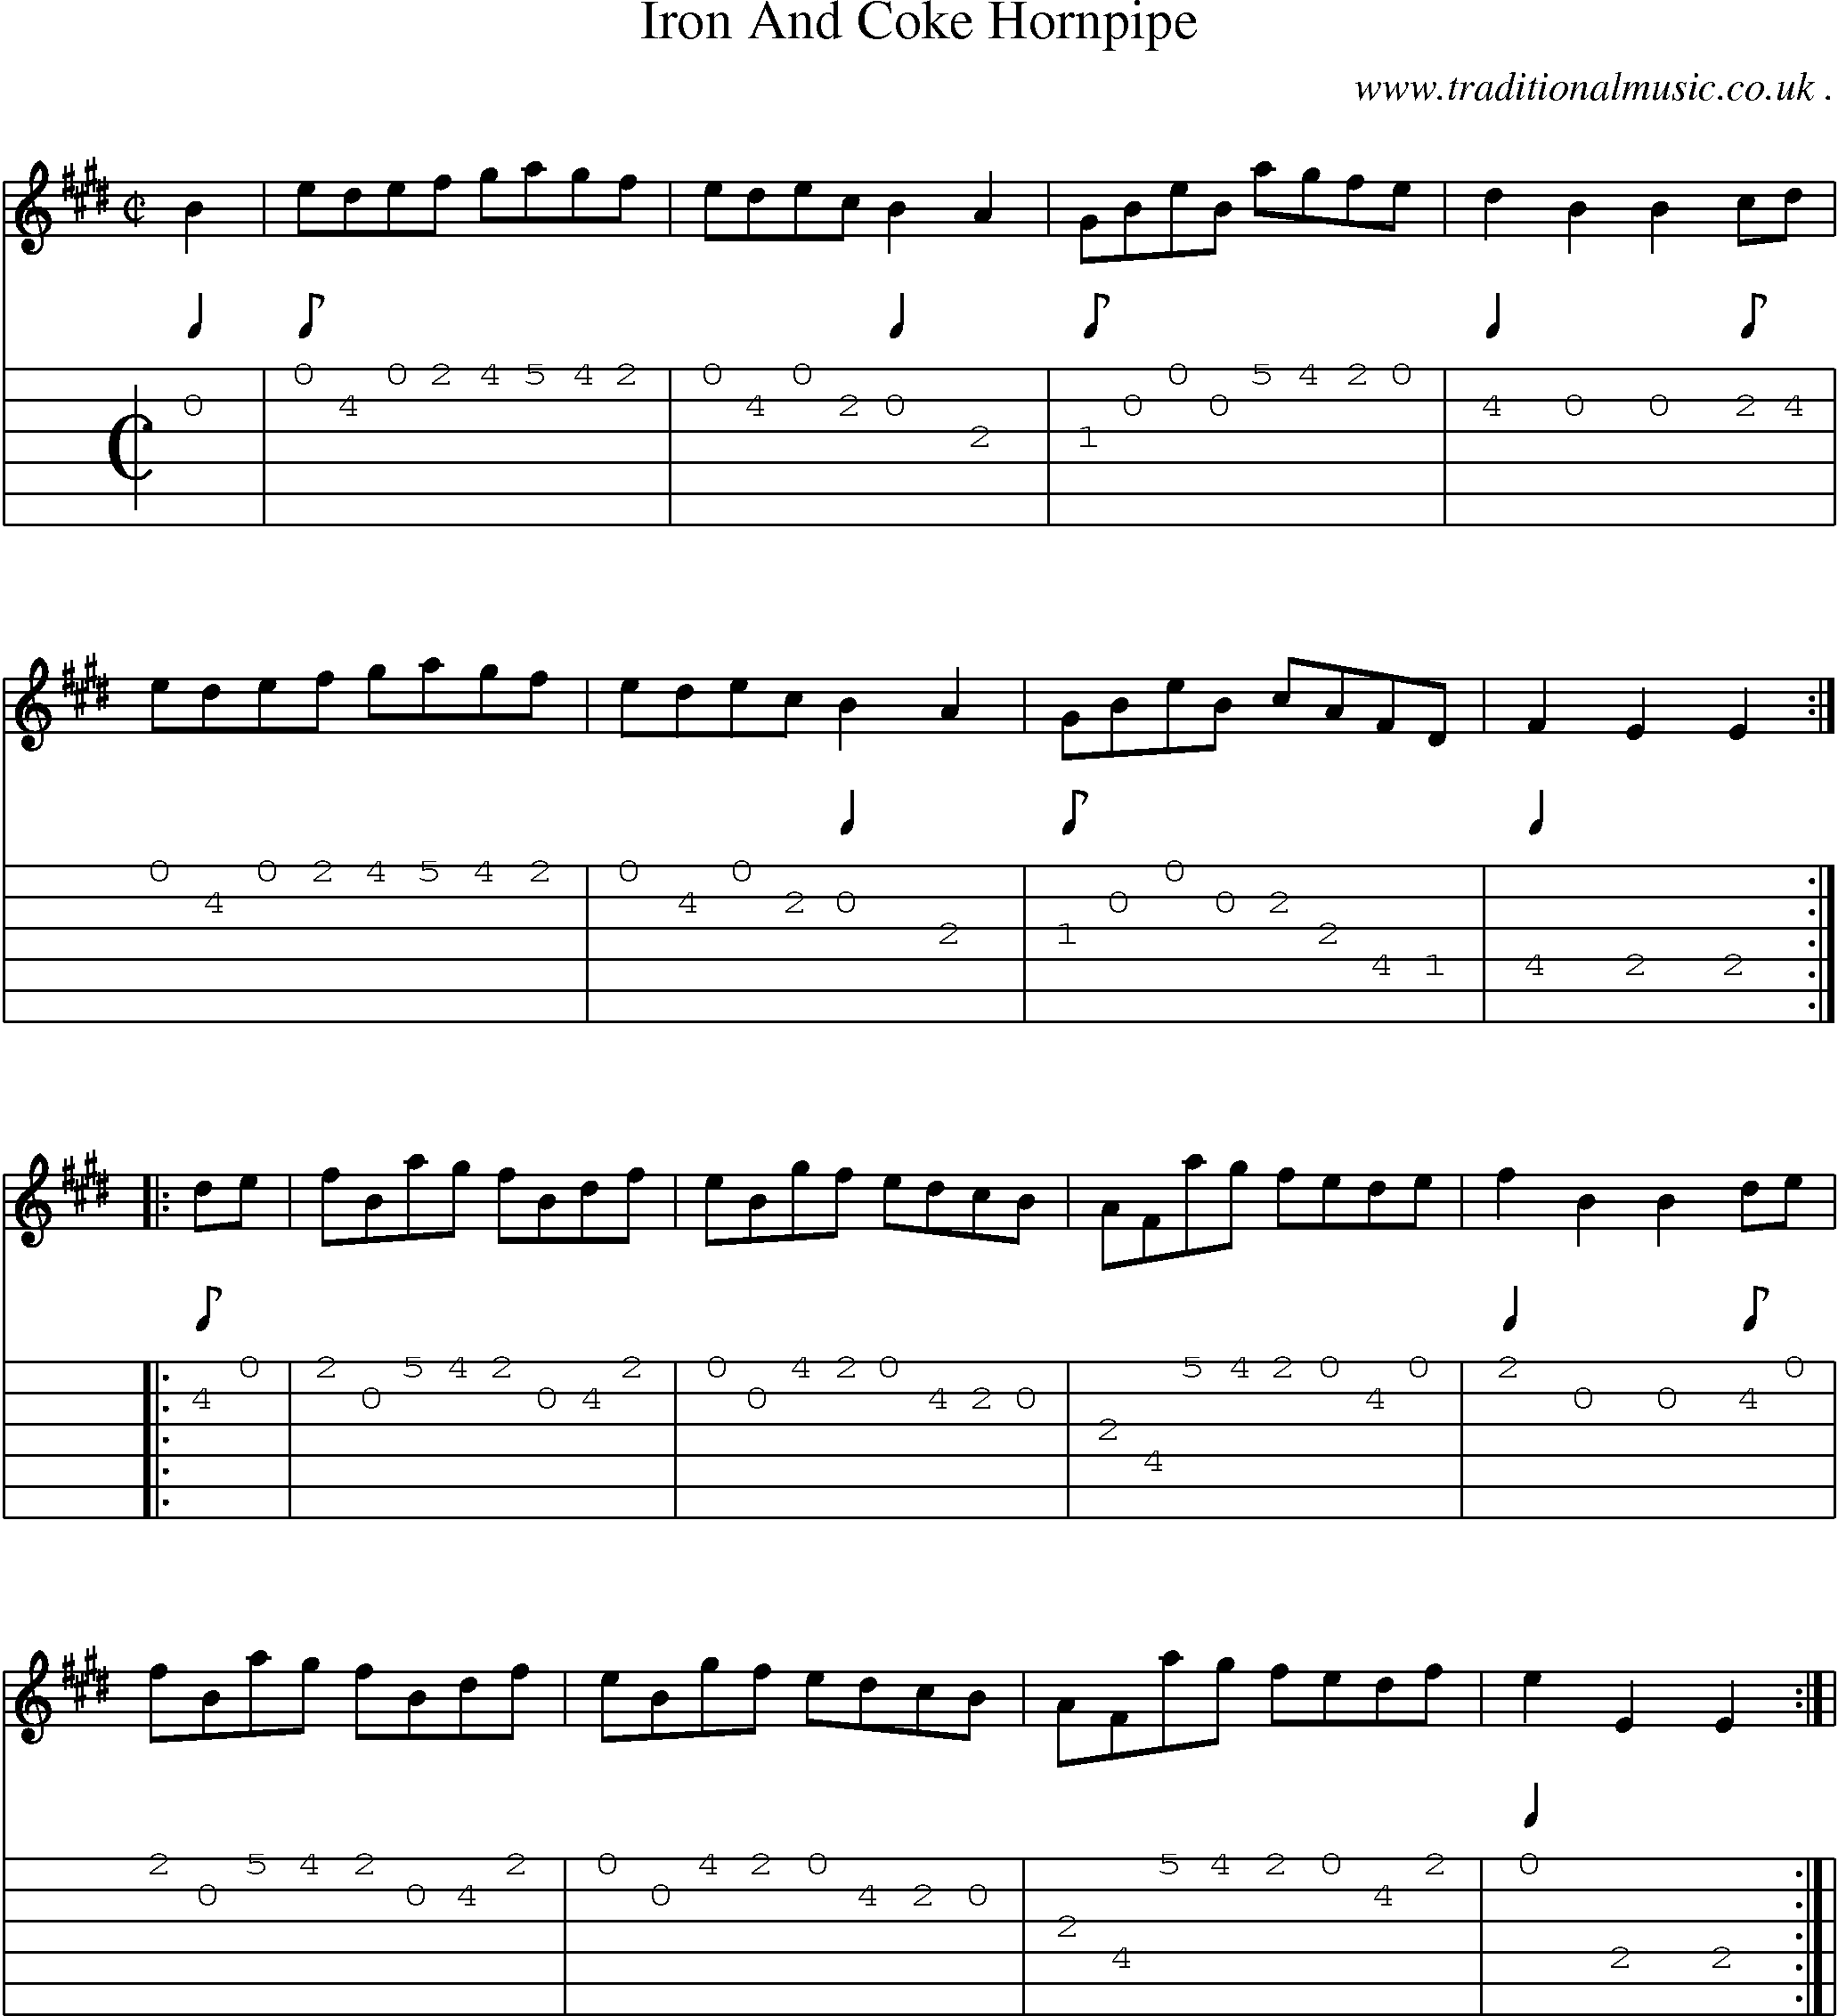 Sheet-Music and Guitar Tabs for Iron And Coke Hornpipe